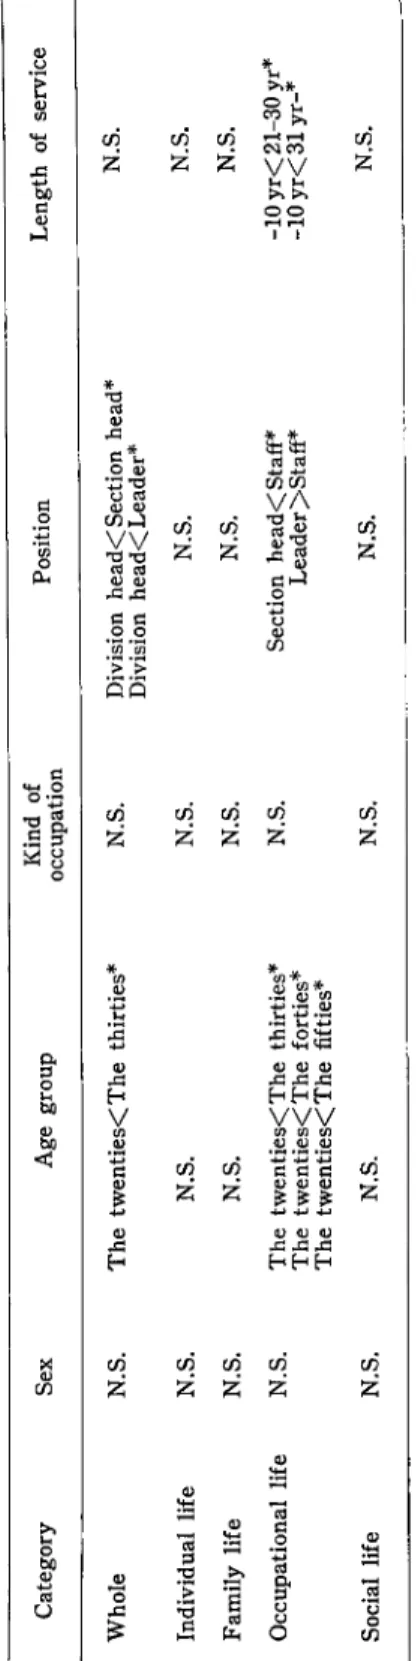 Table 4. Difference in stress score at each category. N. S.: not significant，* p&lt;0.05.